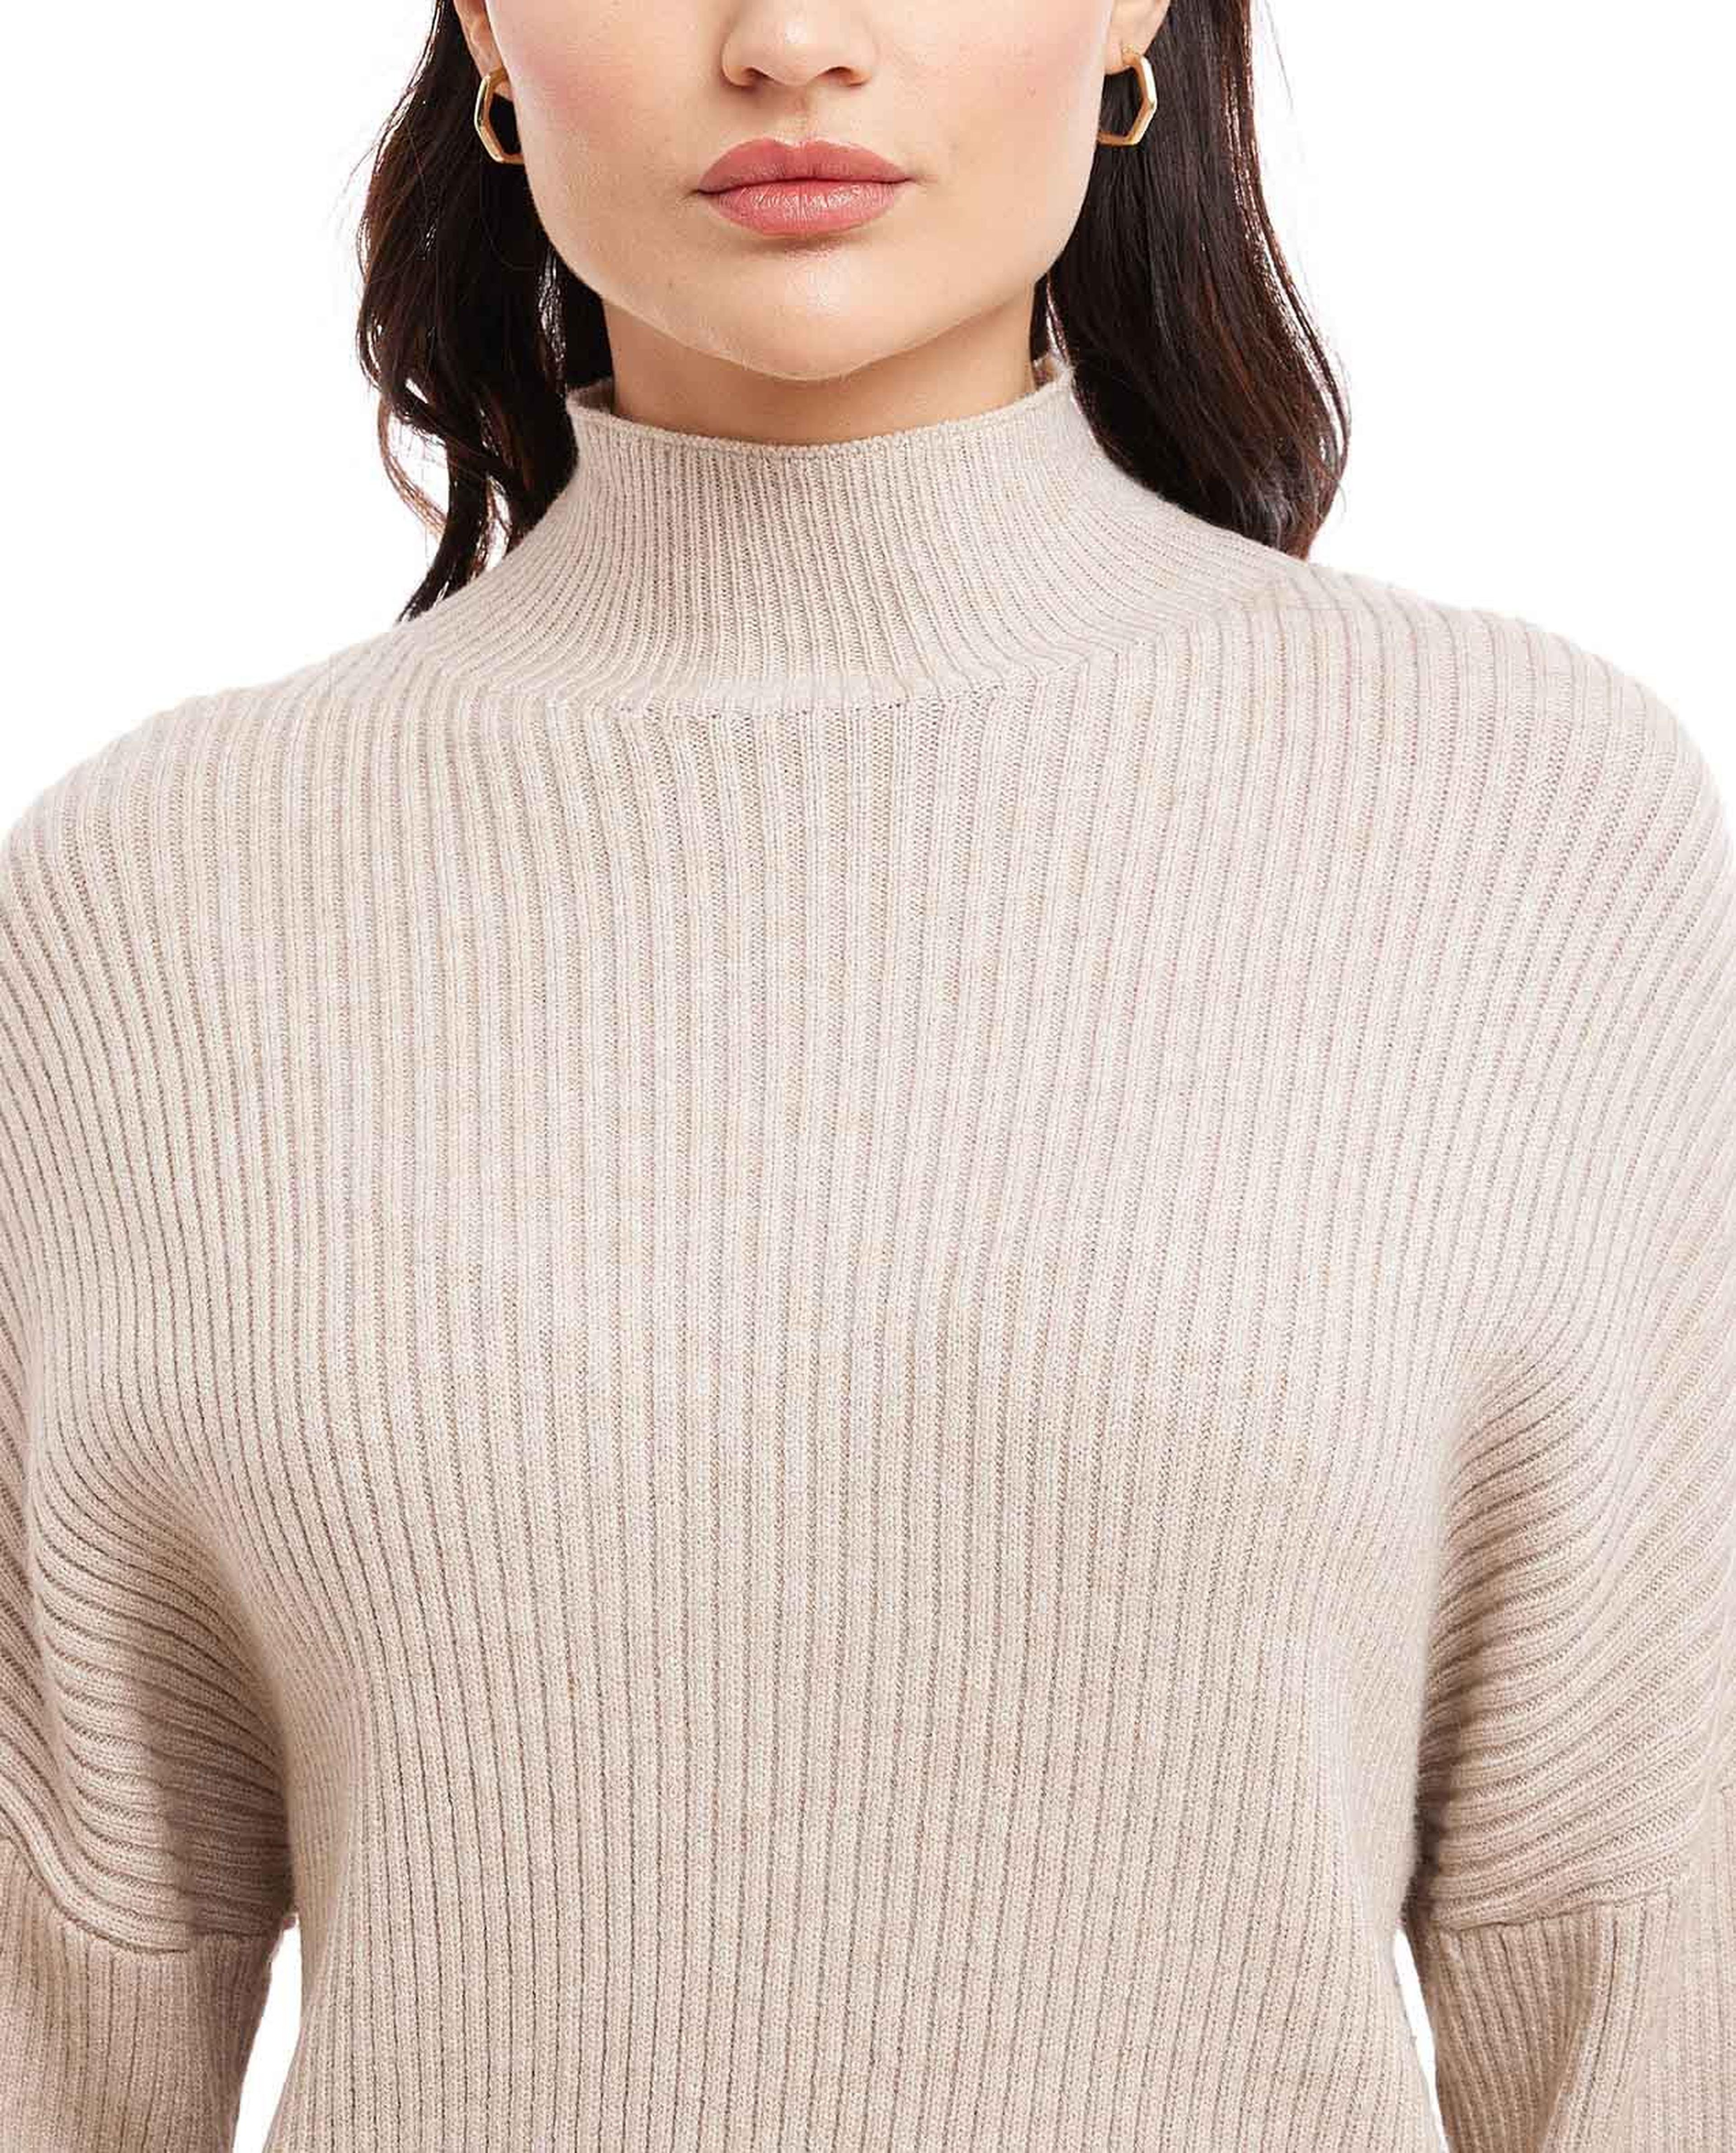 Ribbed Sweater with High Neck and Long Sleeves